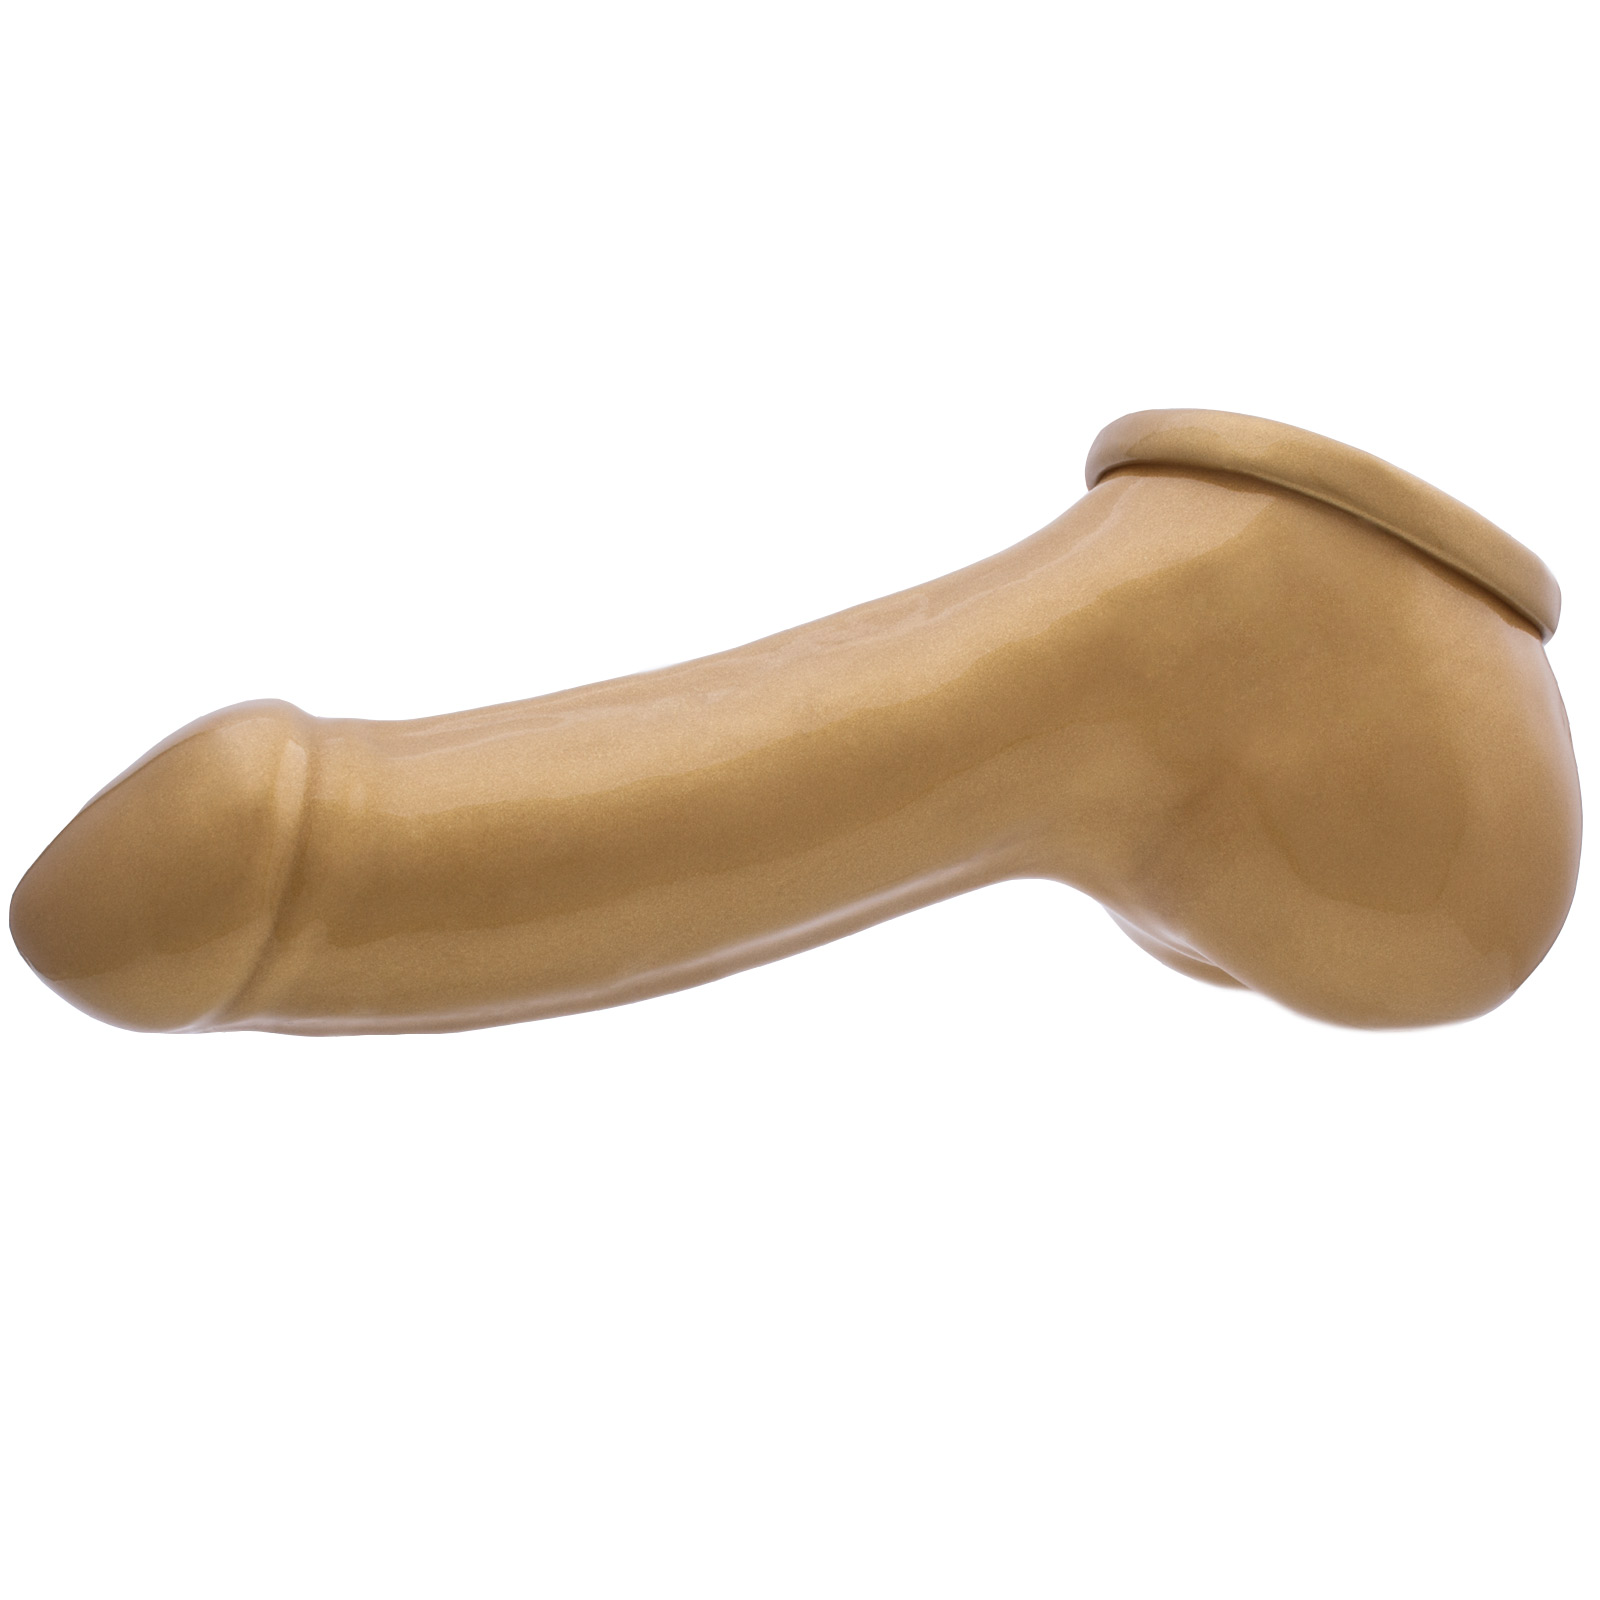 Toylie Latex Penis Sleeve «ADAM 5.5» golden, with molded glans and scrotum